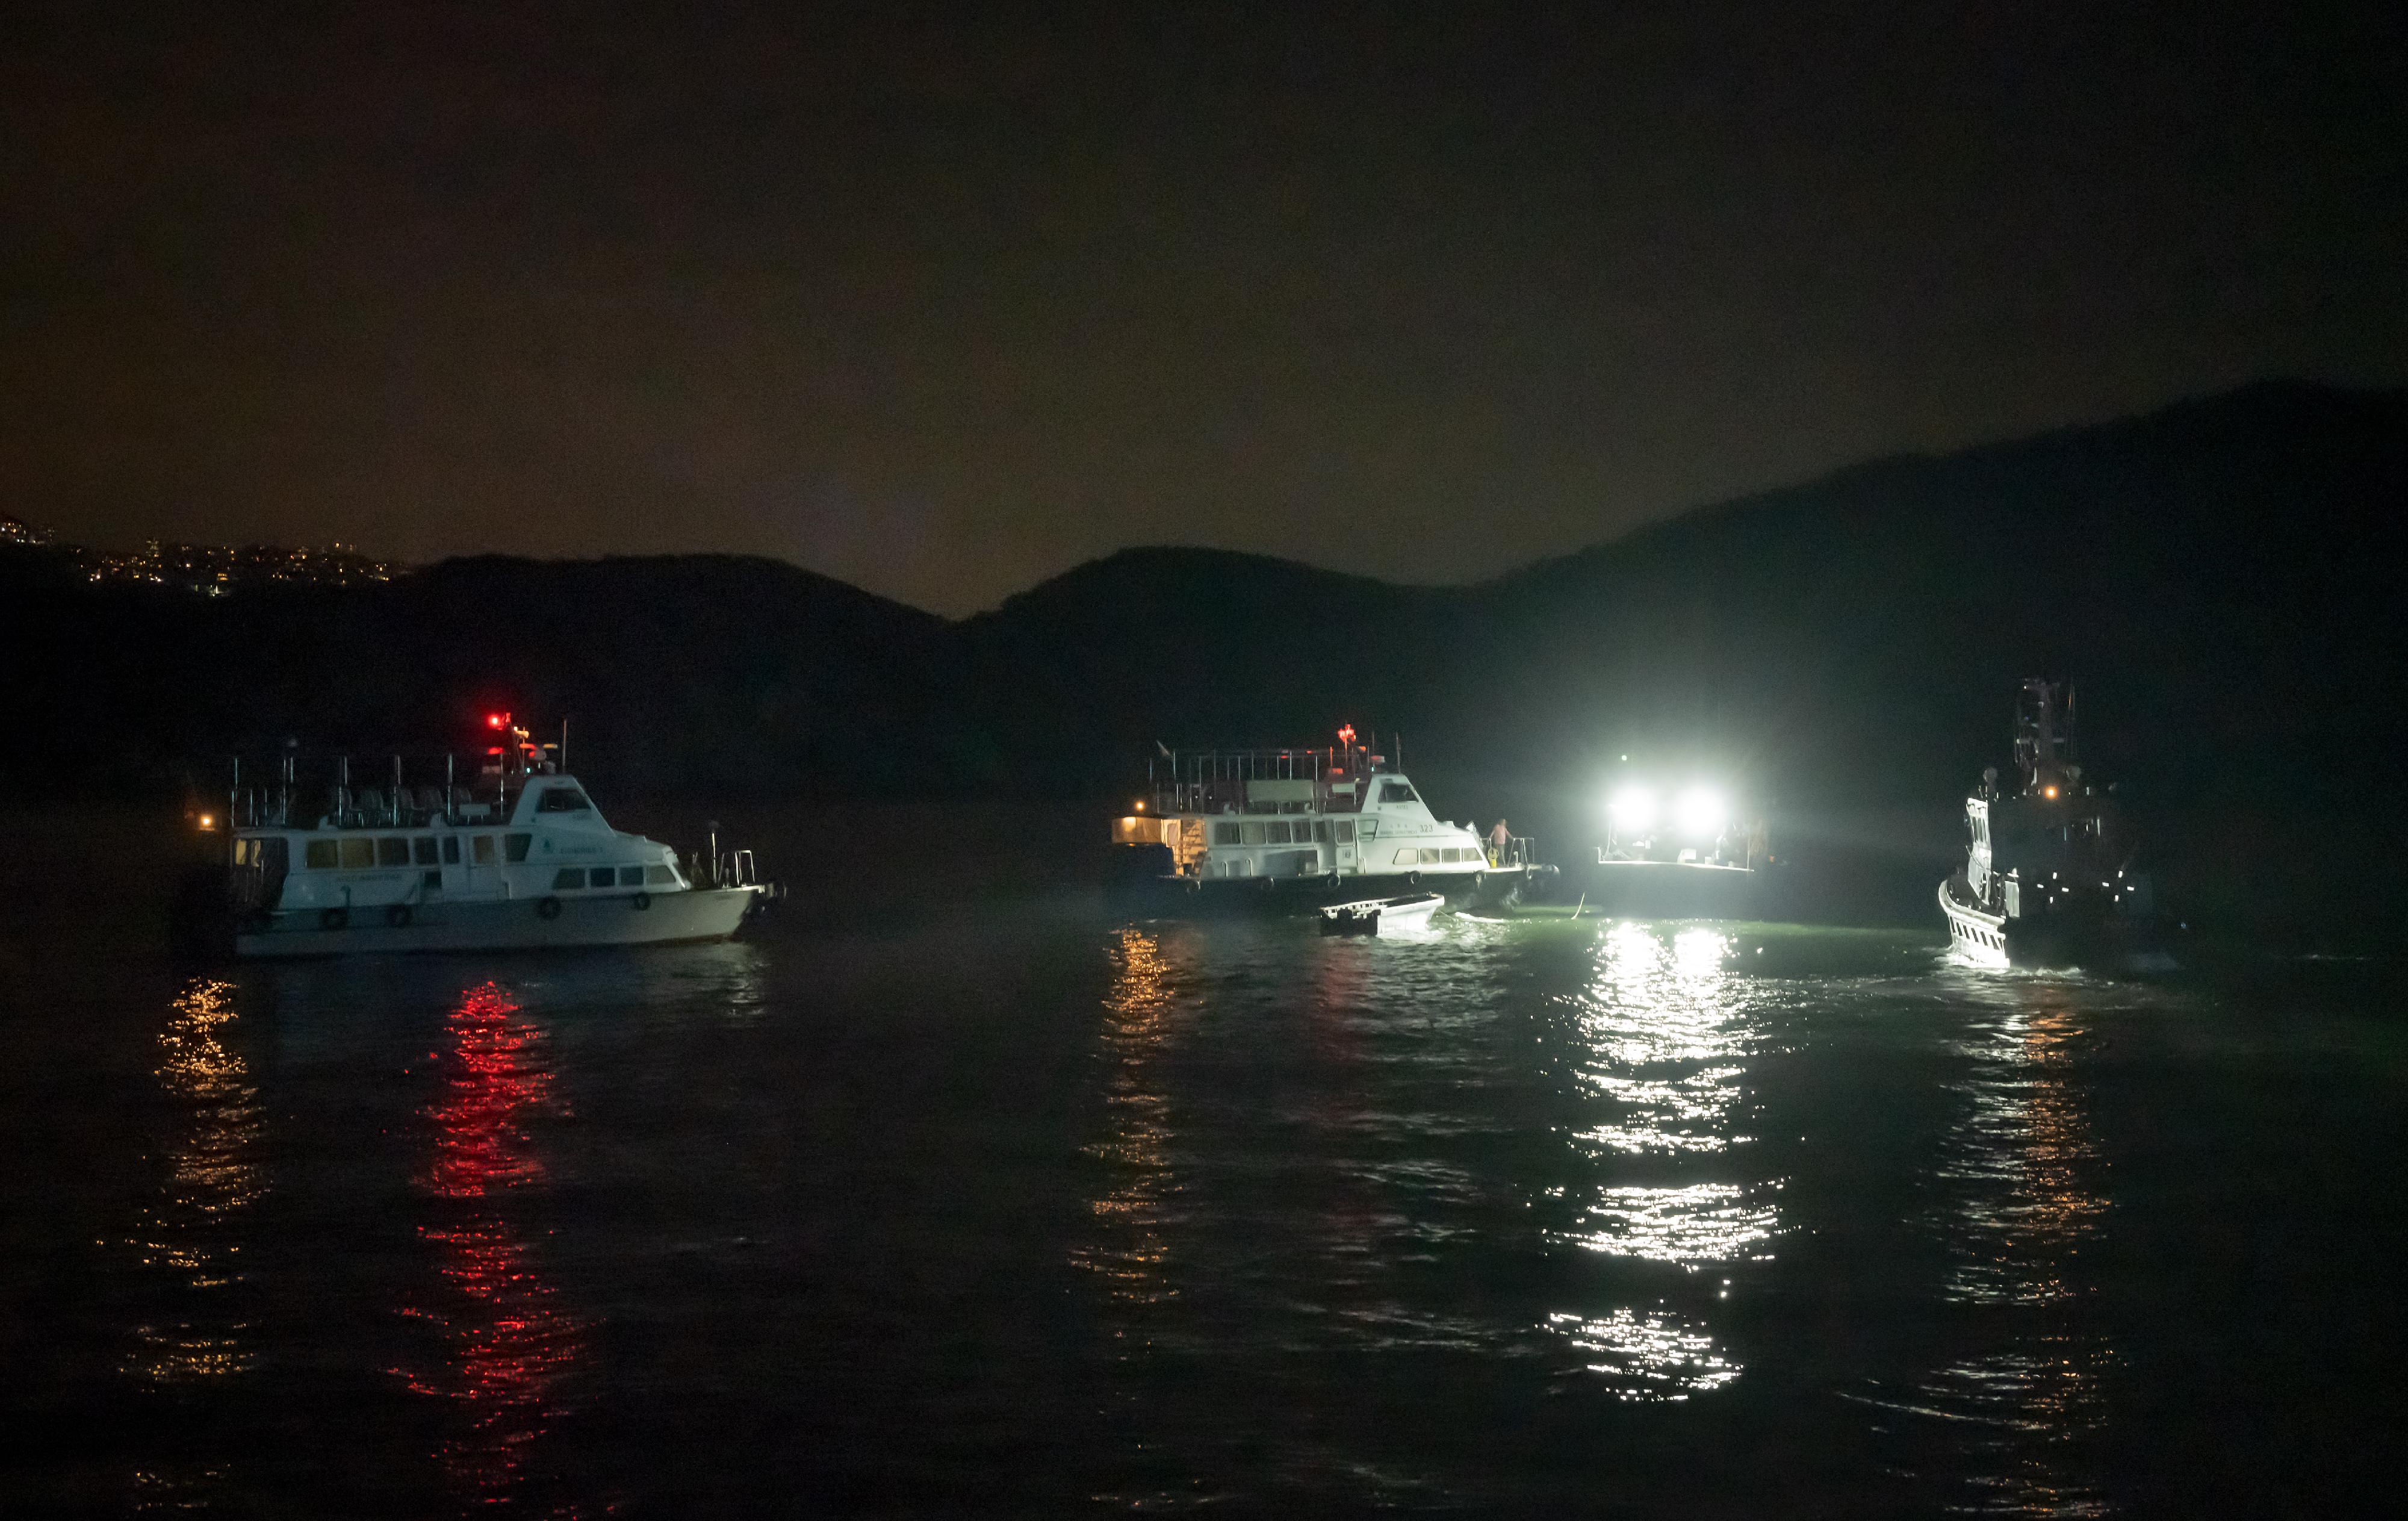 The Marine Department together with the Hong Kong Police Force and the Agriculture, Fisheries and Conservation Department conducted a joint operation against the improper use of bright light for fishing and illegal fishing activities in the southern waters of Hong Kong last night (August 10). Photo shows vessels of the three enforcement departments approaching a fishing vessel for inspection in the joint operation.